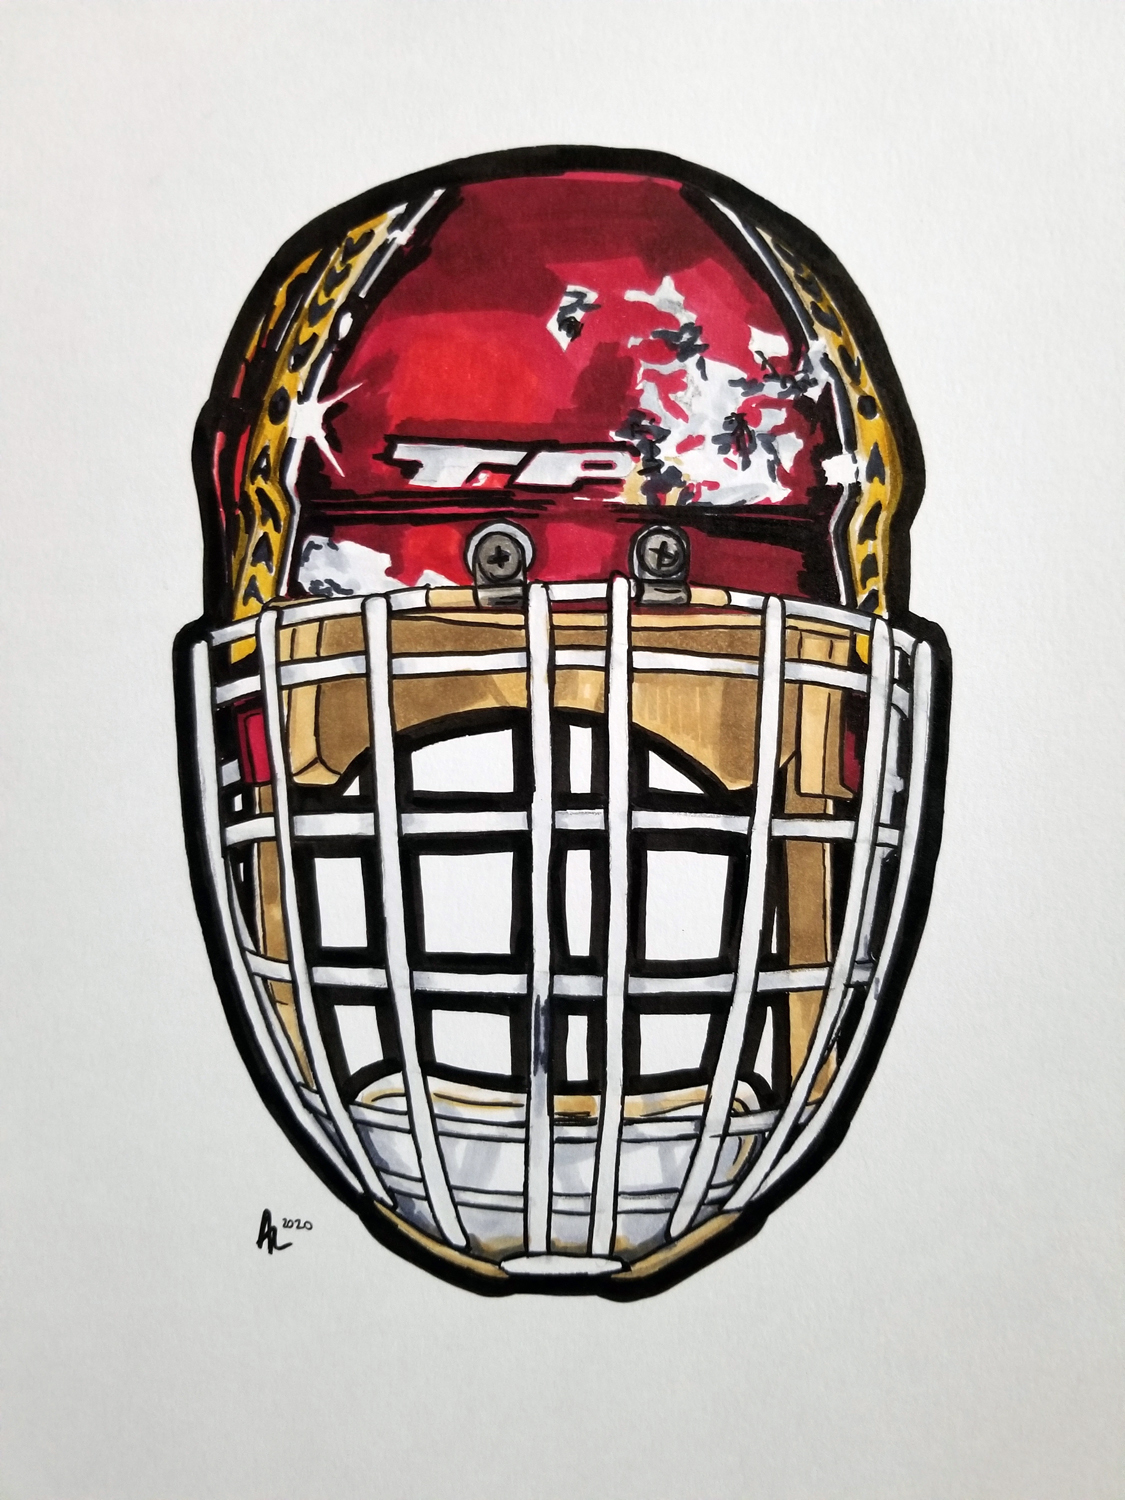 Pen and ink drawing of a goalie helmet with cage and red and gold design.